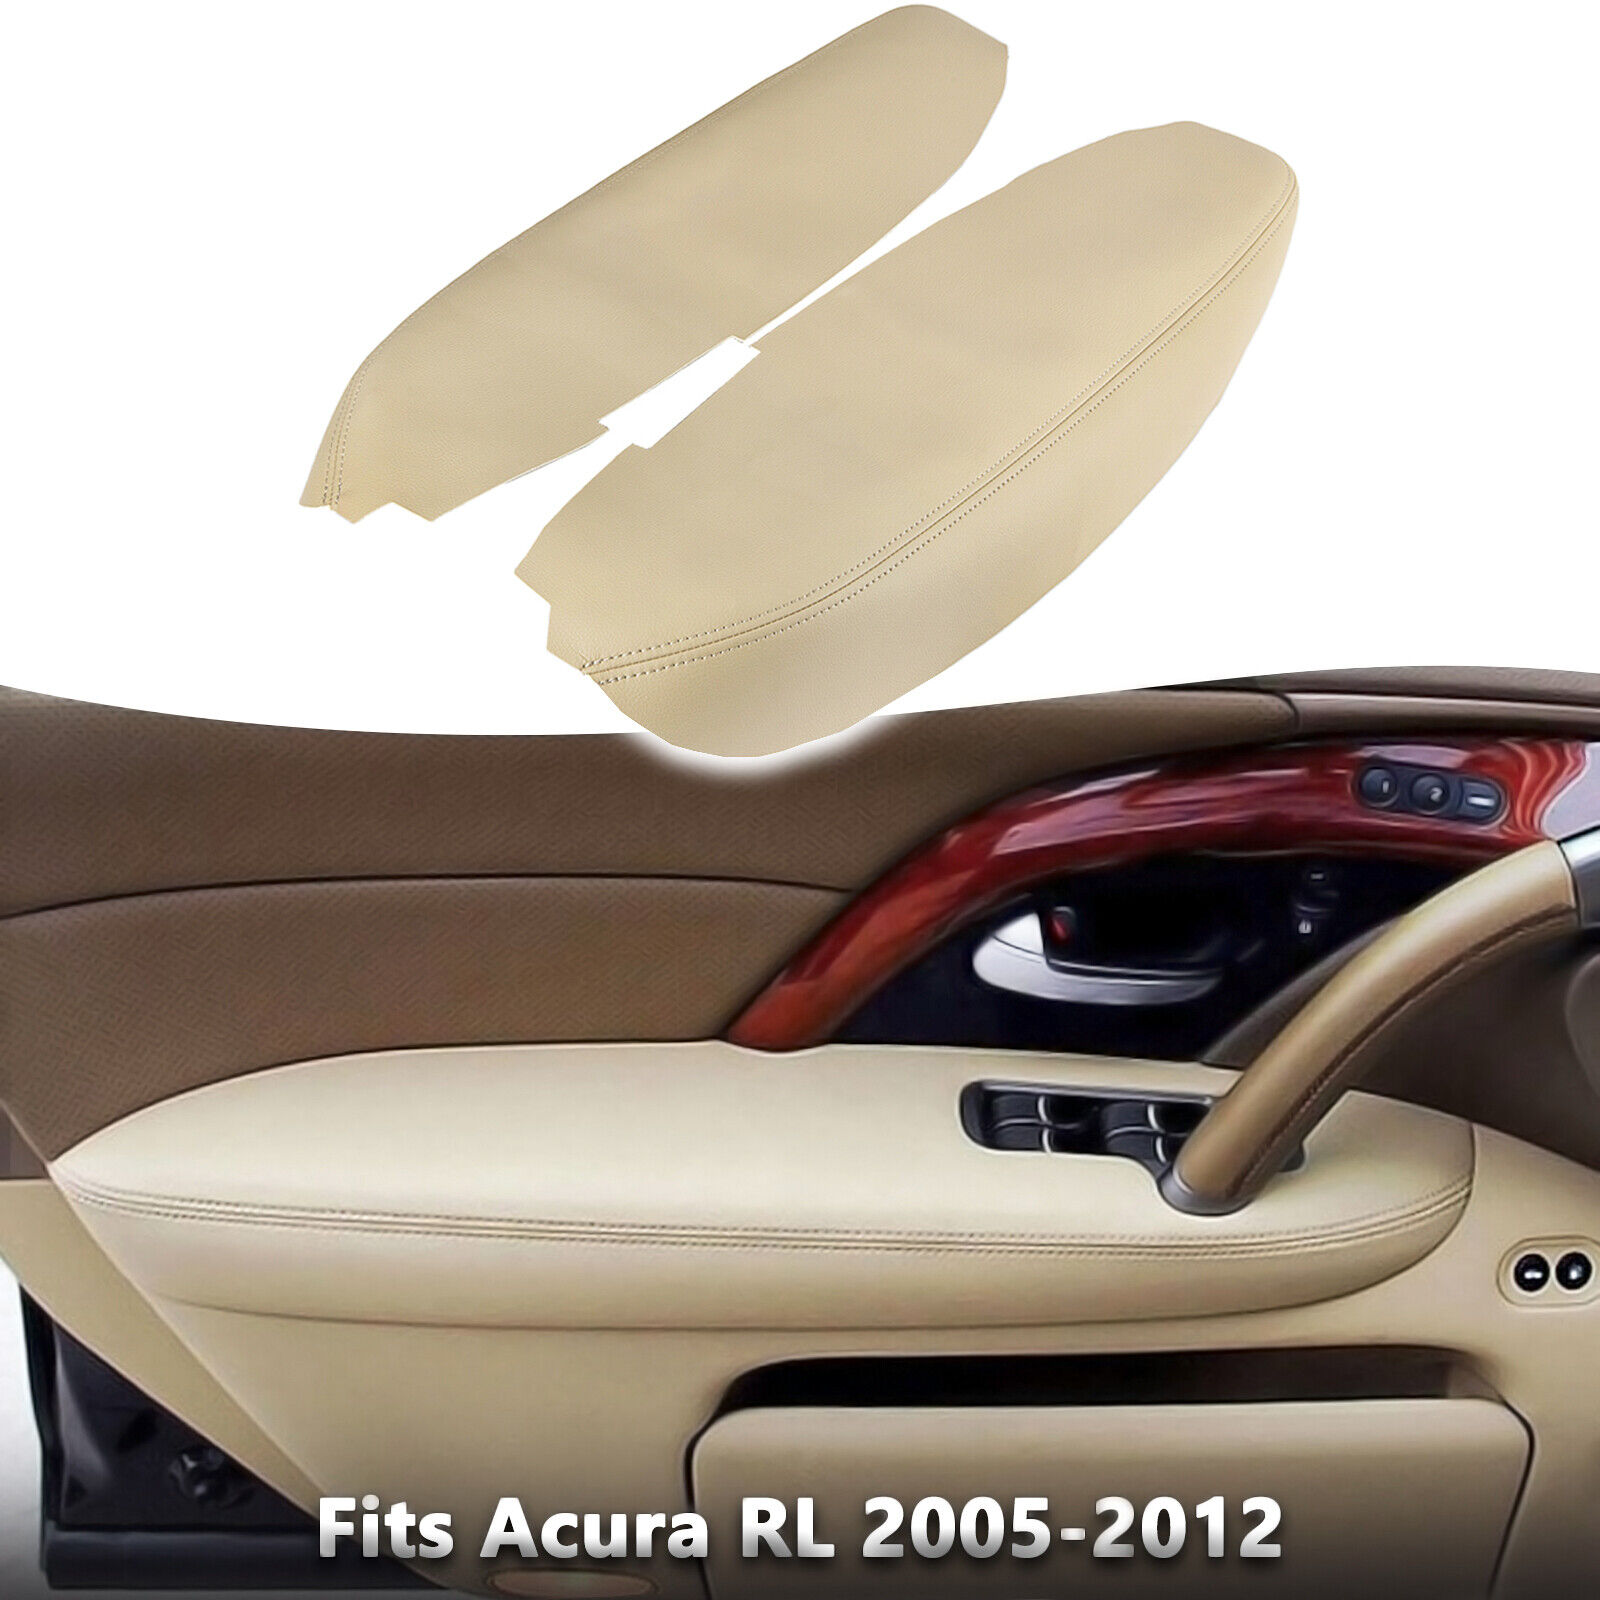 Fits 2005-2012 Acura RL Front Door Panel Armrest Leather Cover Beige Tan 2pcs